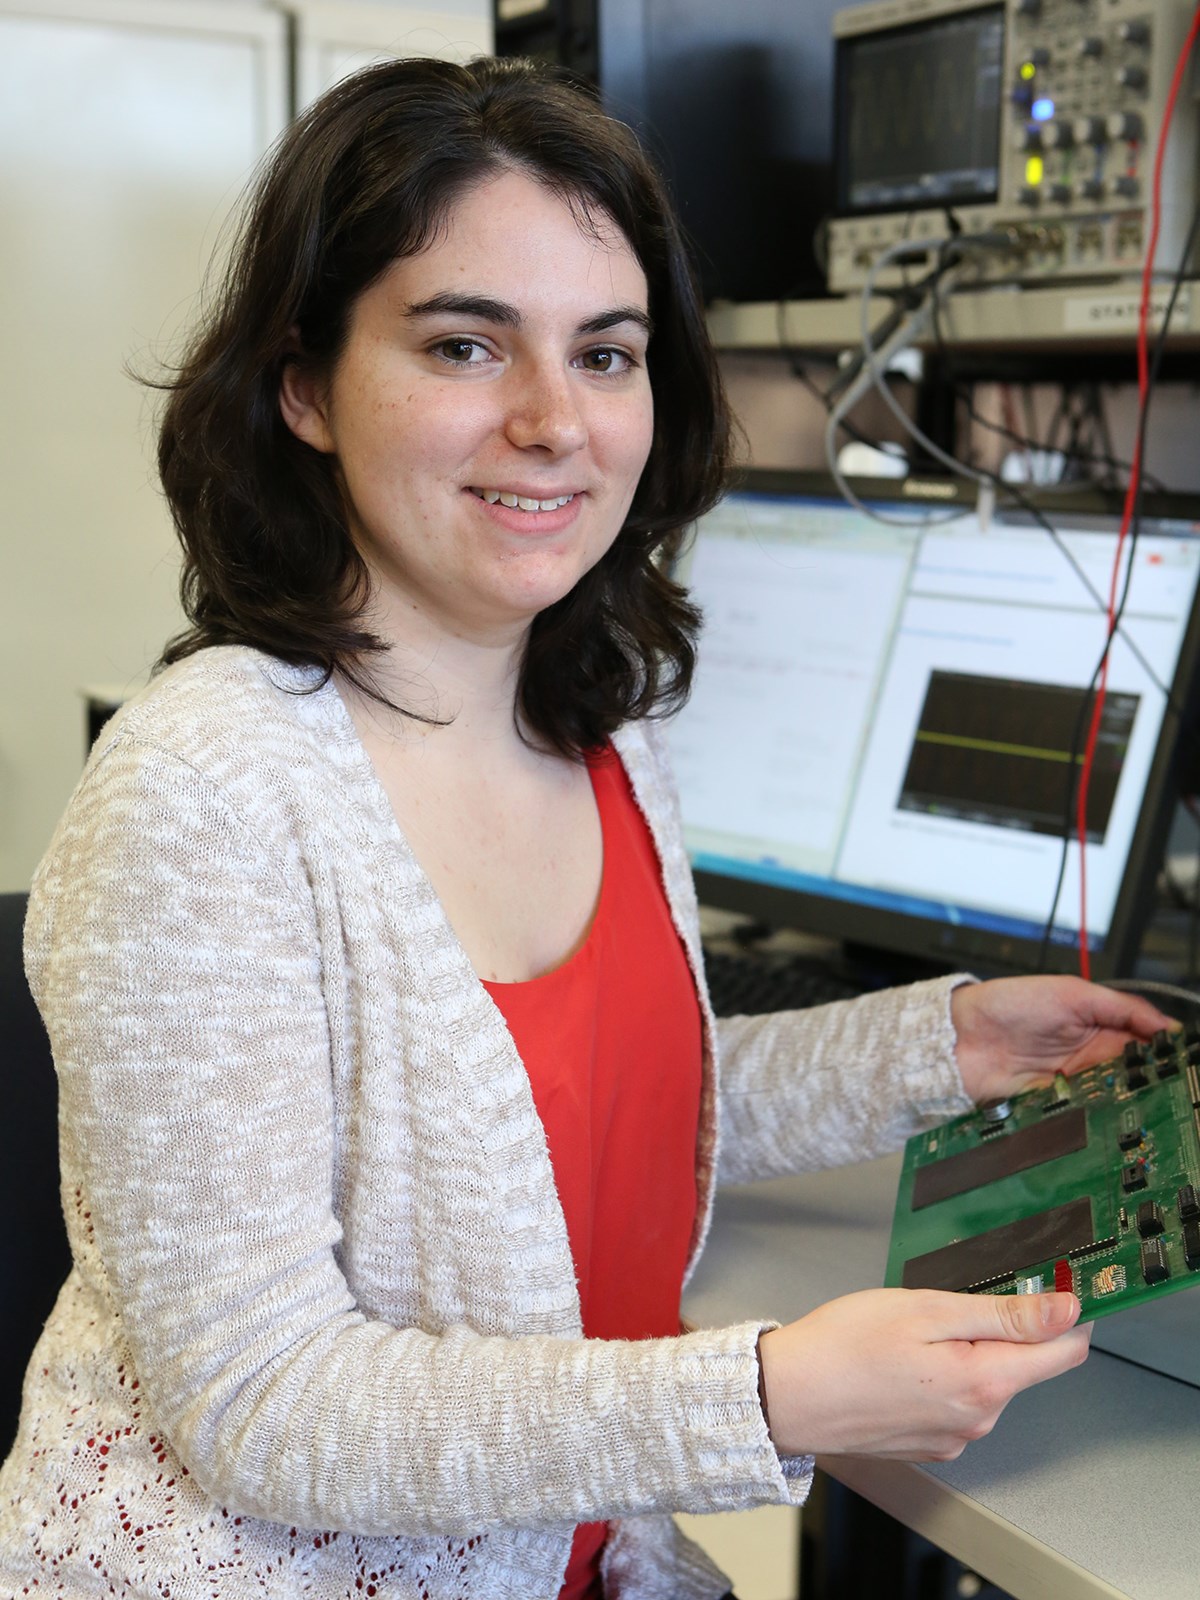 ECE student, Erin Graceffa poses with electrical equipment and holding a circuit.